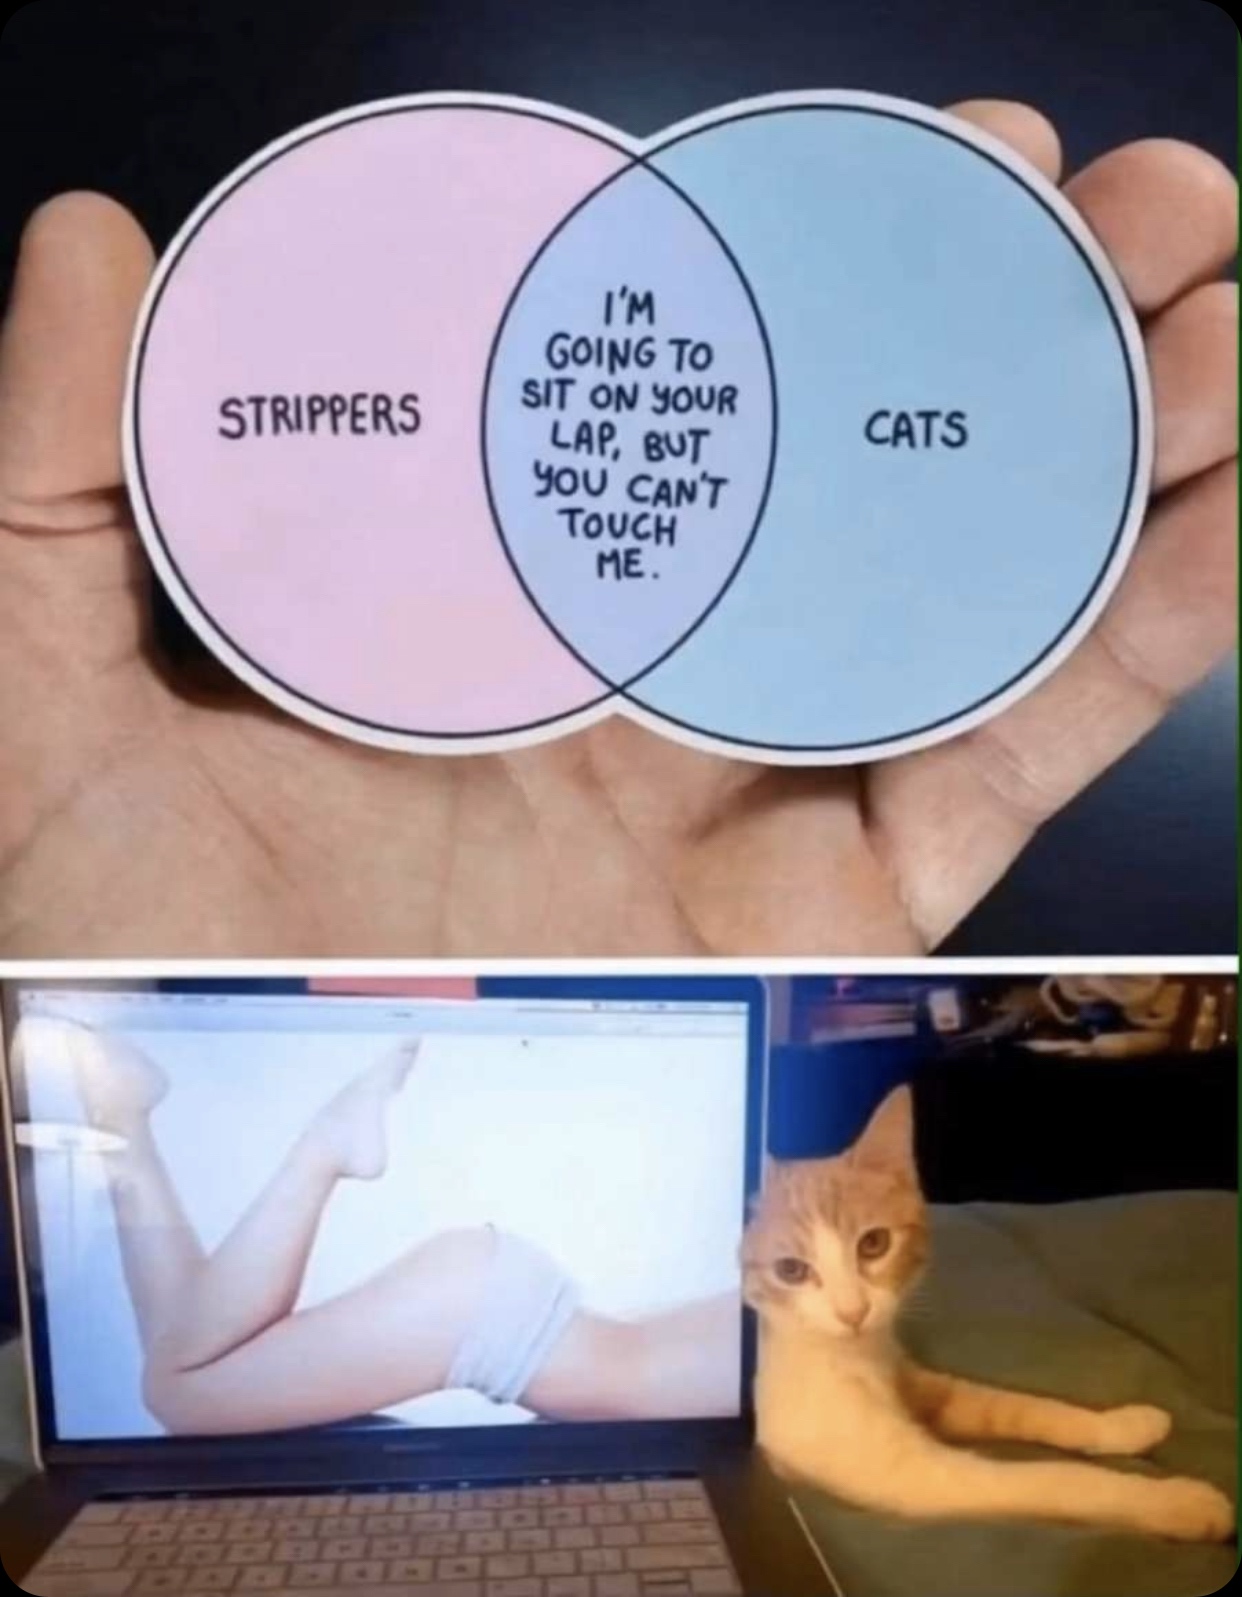 Internet meme - I'M Going To Sit On Your Lap, But Strippers Cats You Can'T Touch Me